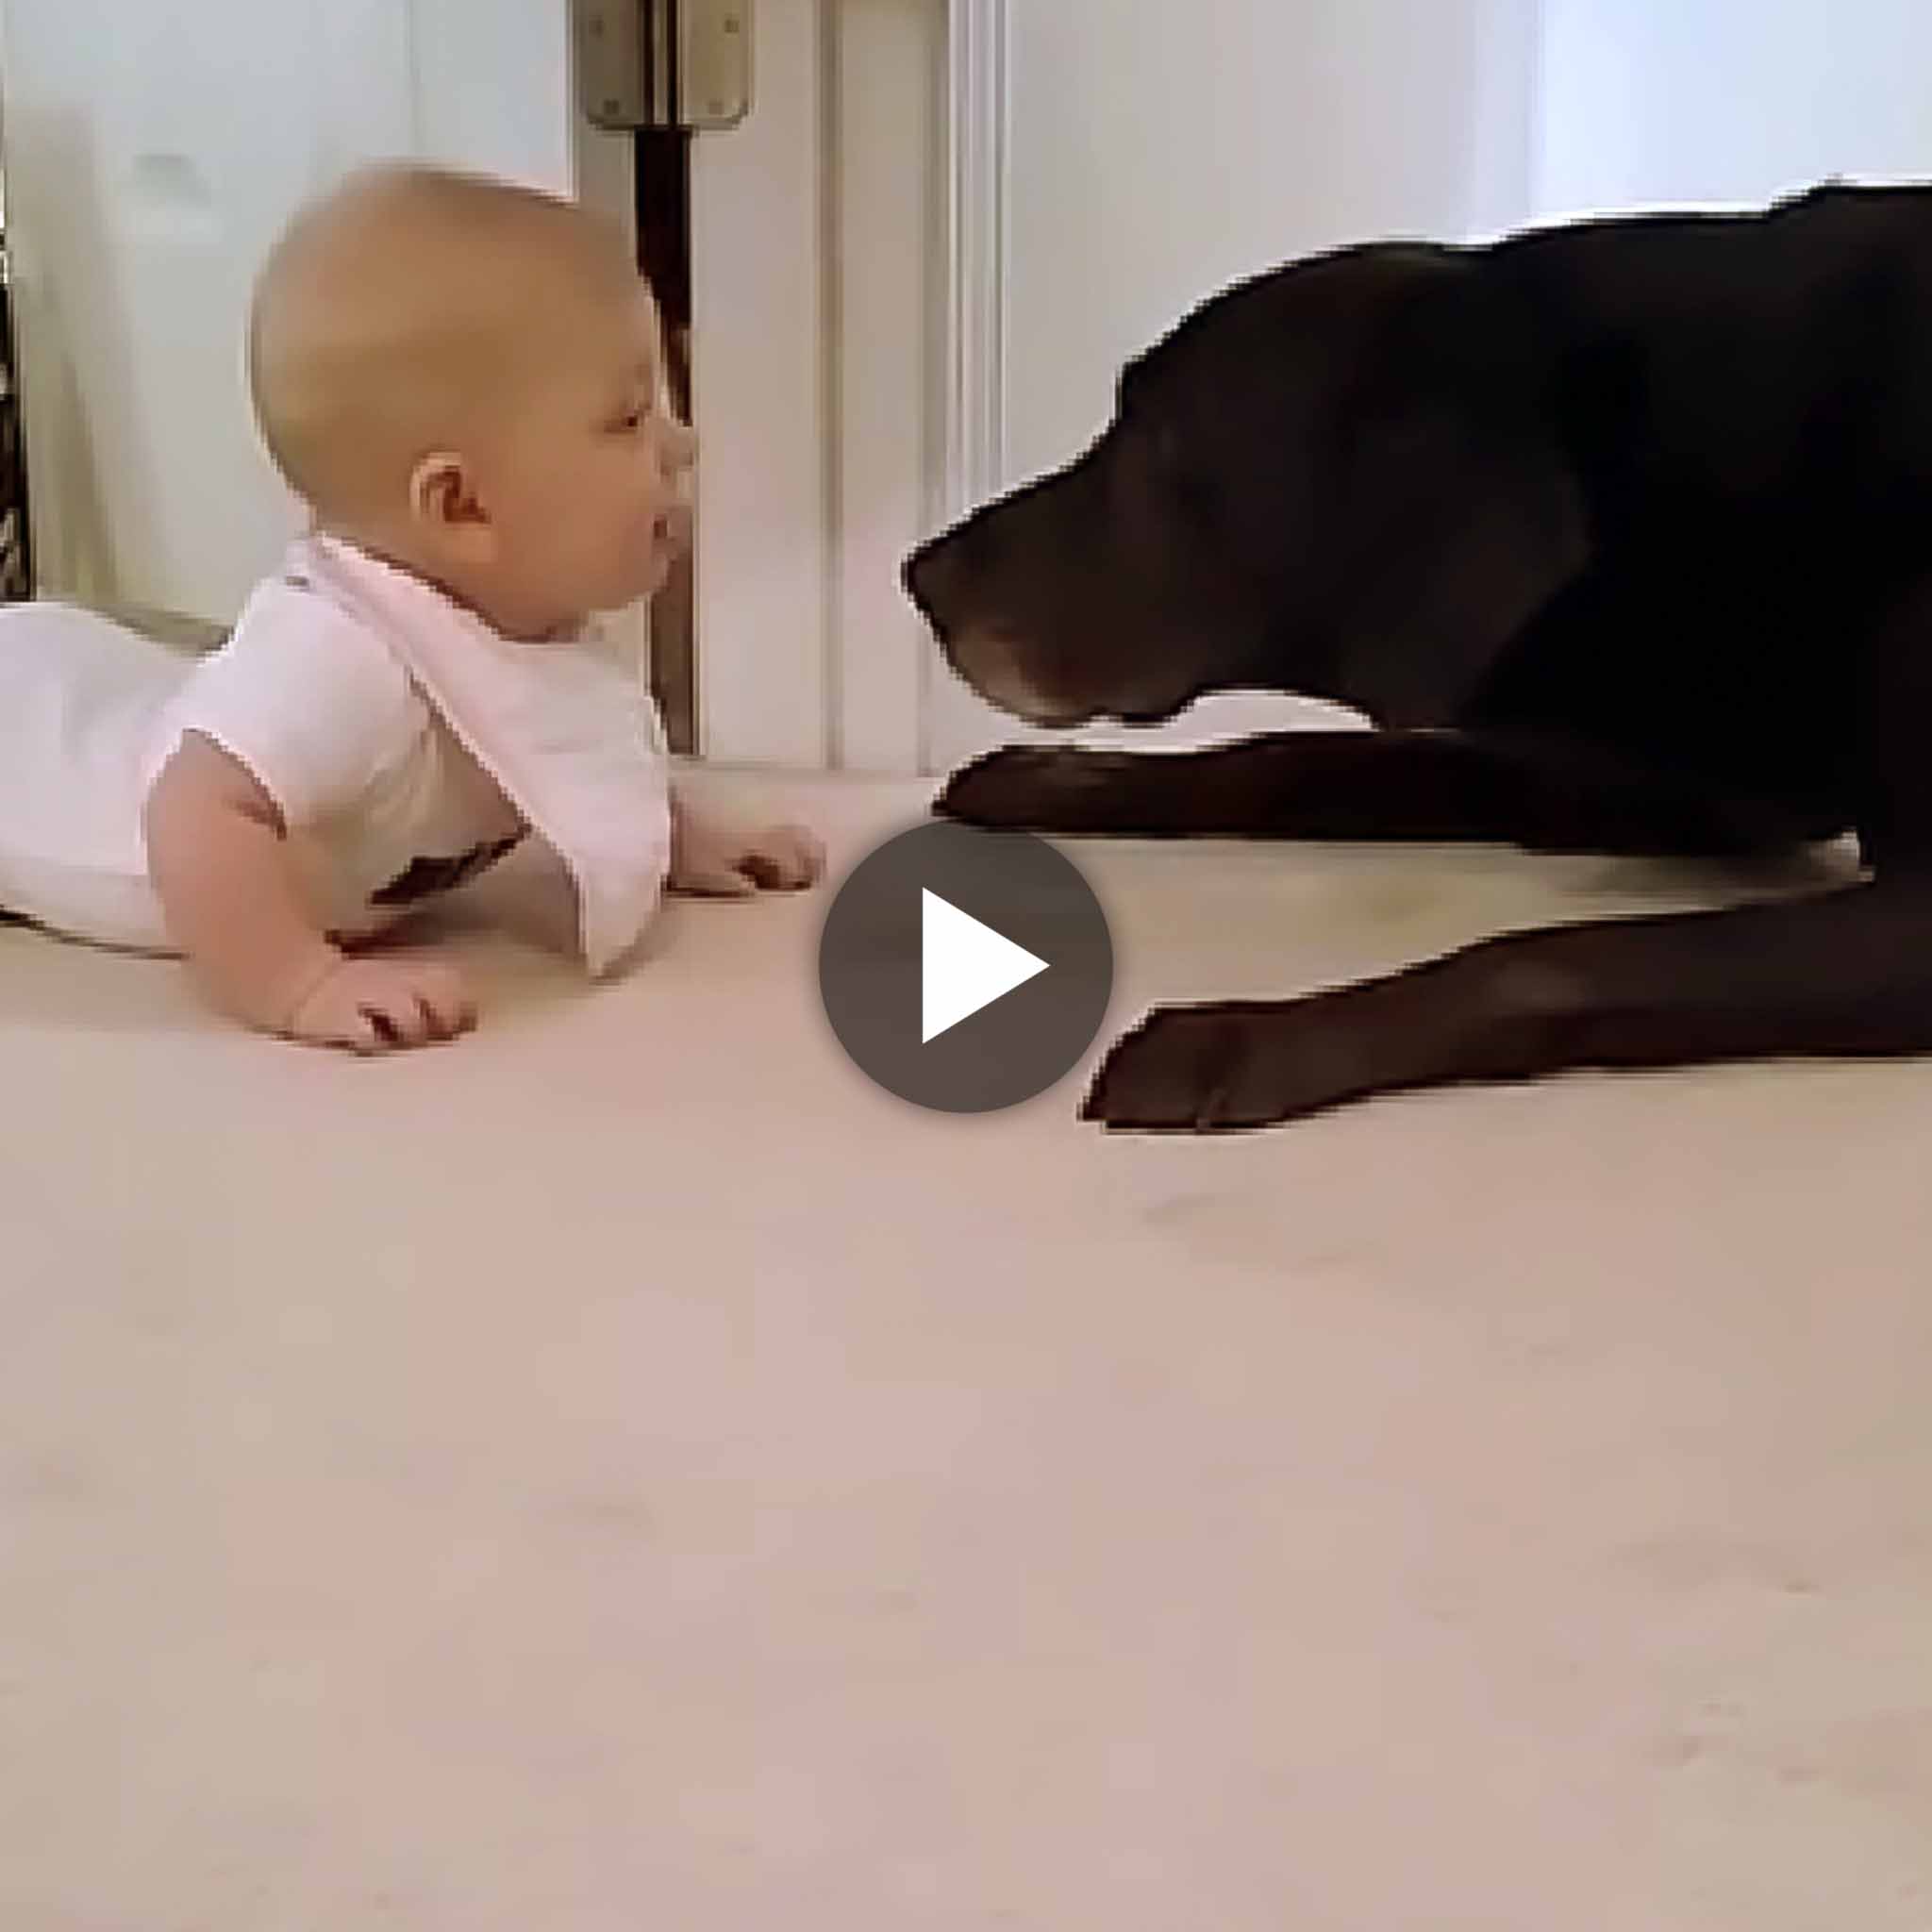 Innocent Baby’s Encounter with Dog Sparks an Unexpectedly Funny Reaction